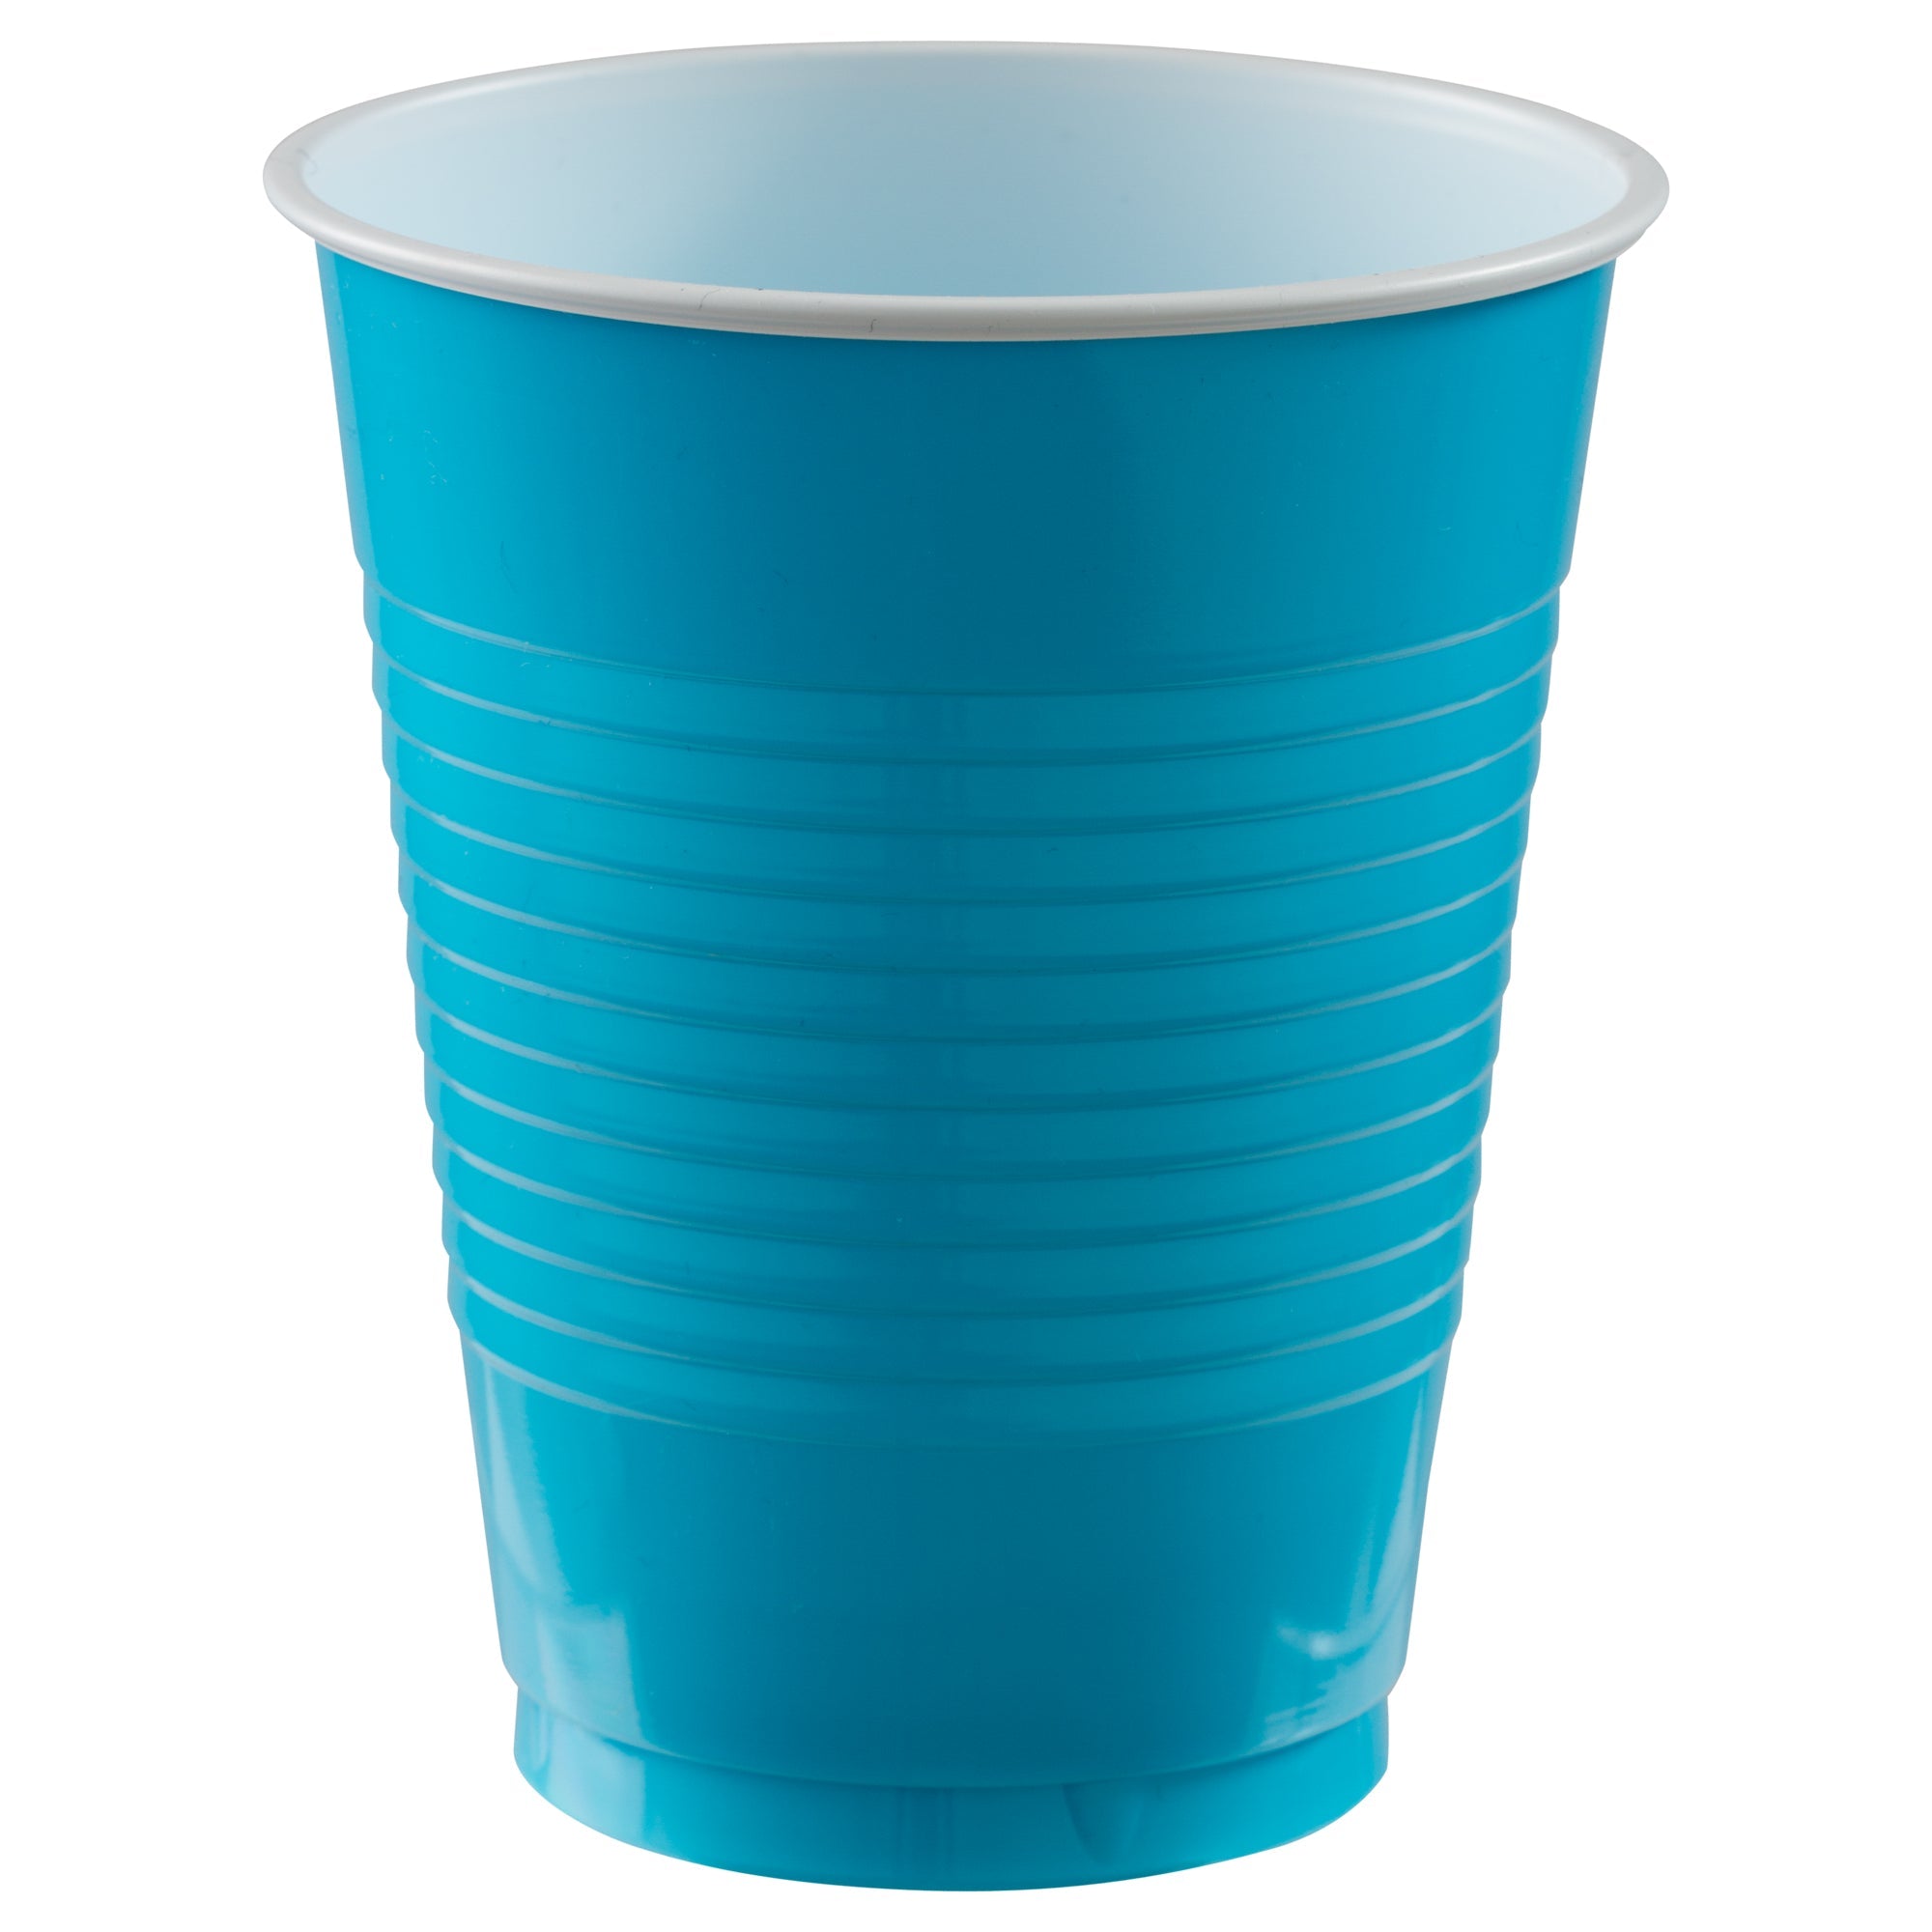 Caribbean Blue 18 oz. Plastic Cups Package of 50